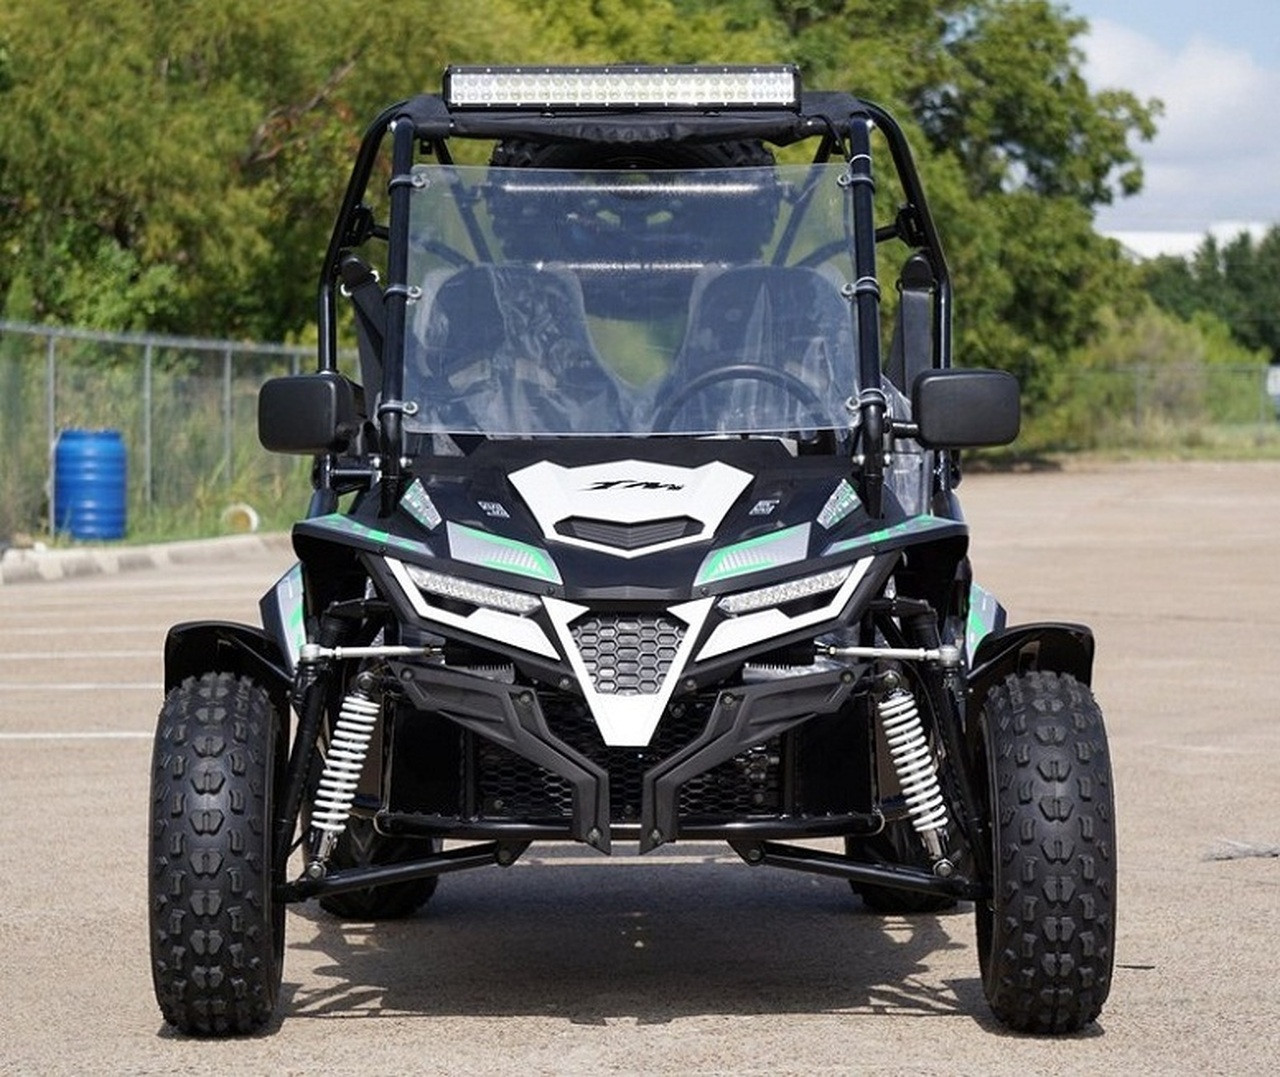 Trailmaster Cheetah 200EX Off Road UTV / Go Kart / side-by-side Wind Shield, Light bar, Spare Tire, Upgraded Center Pivot rear end, Fuel Injected Front Side View